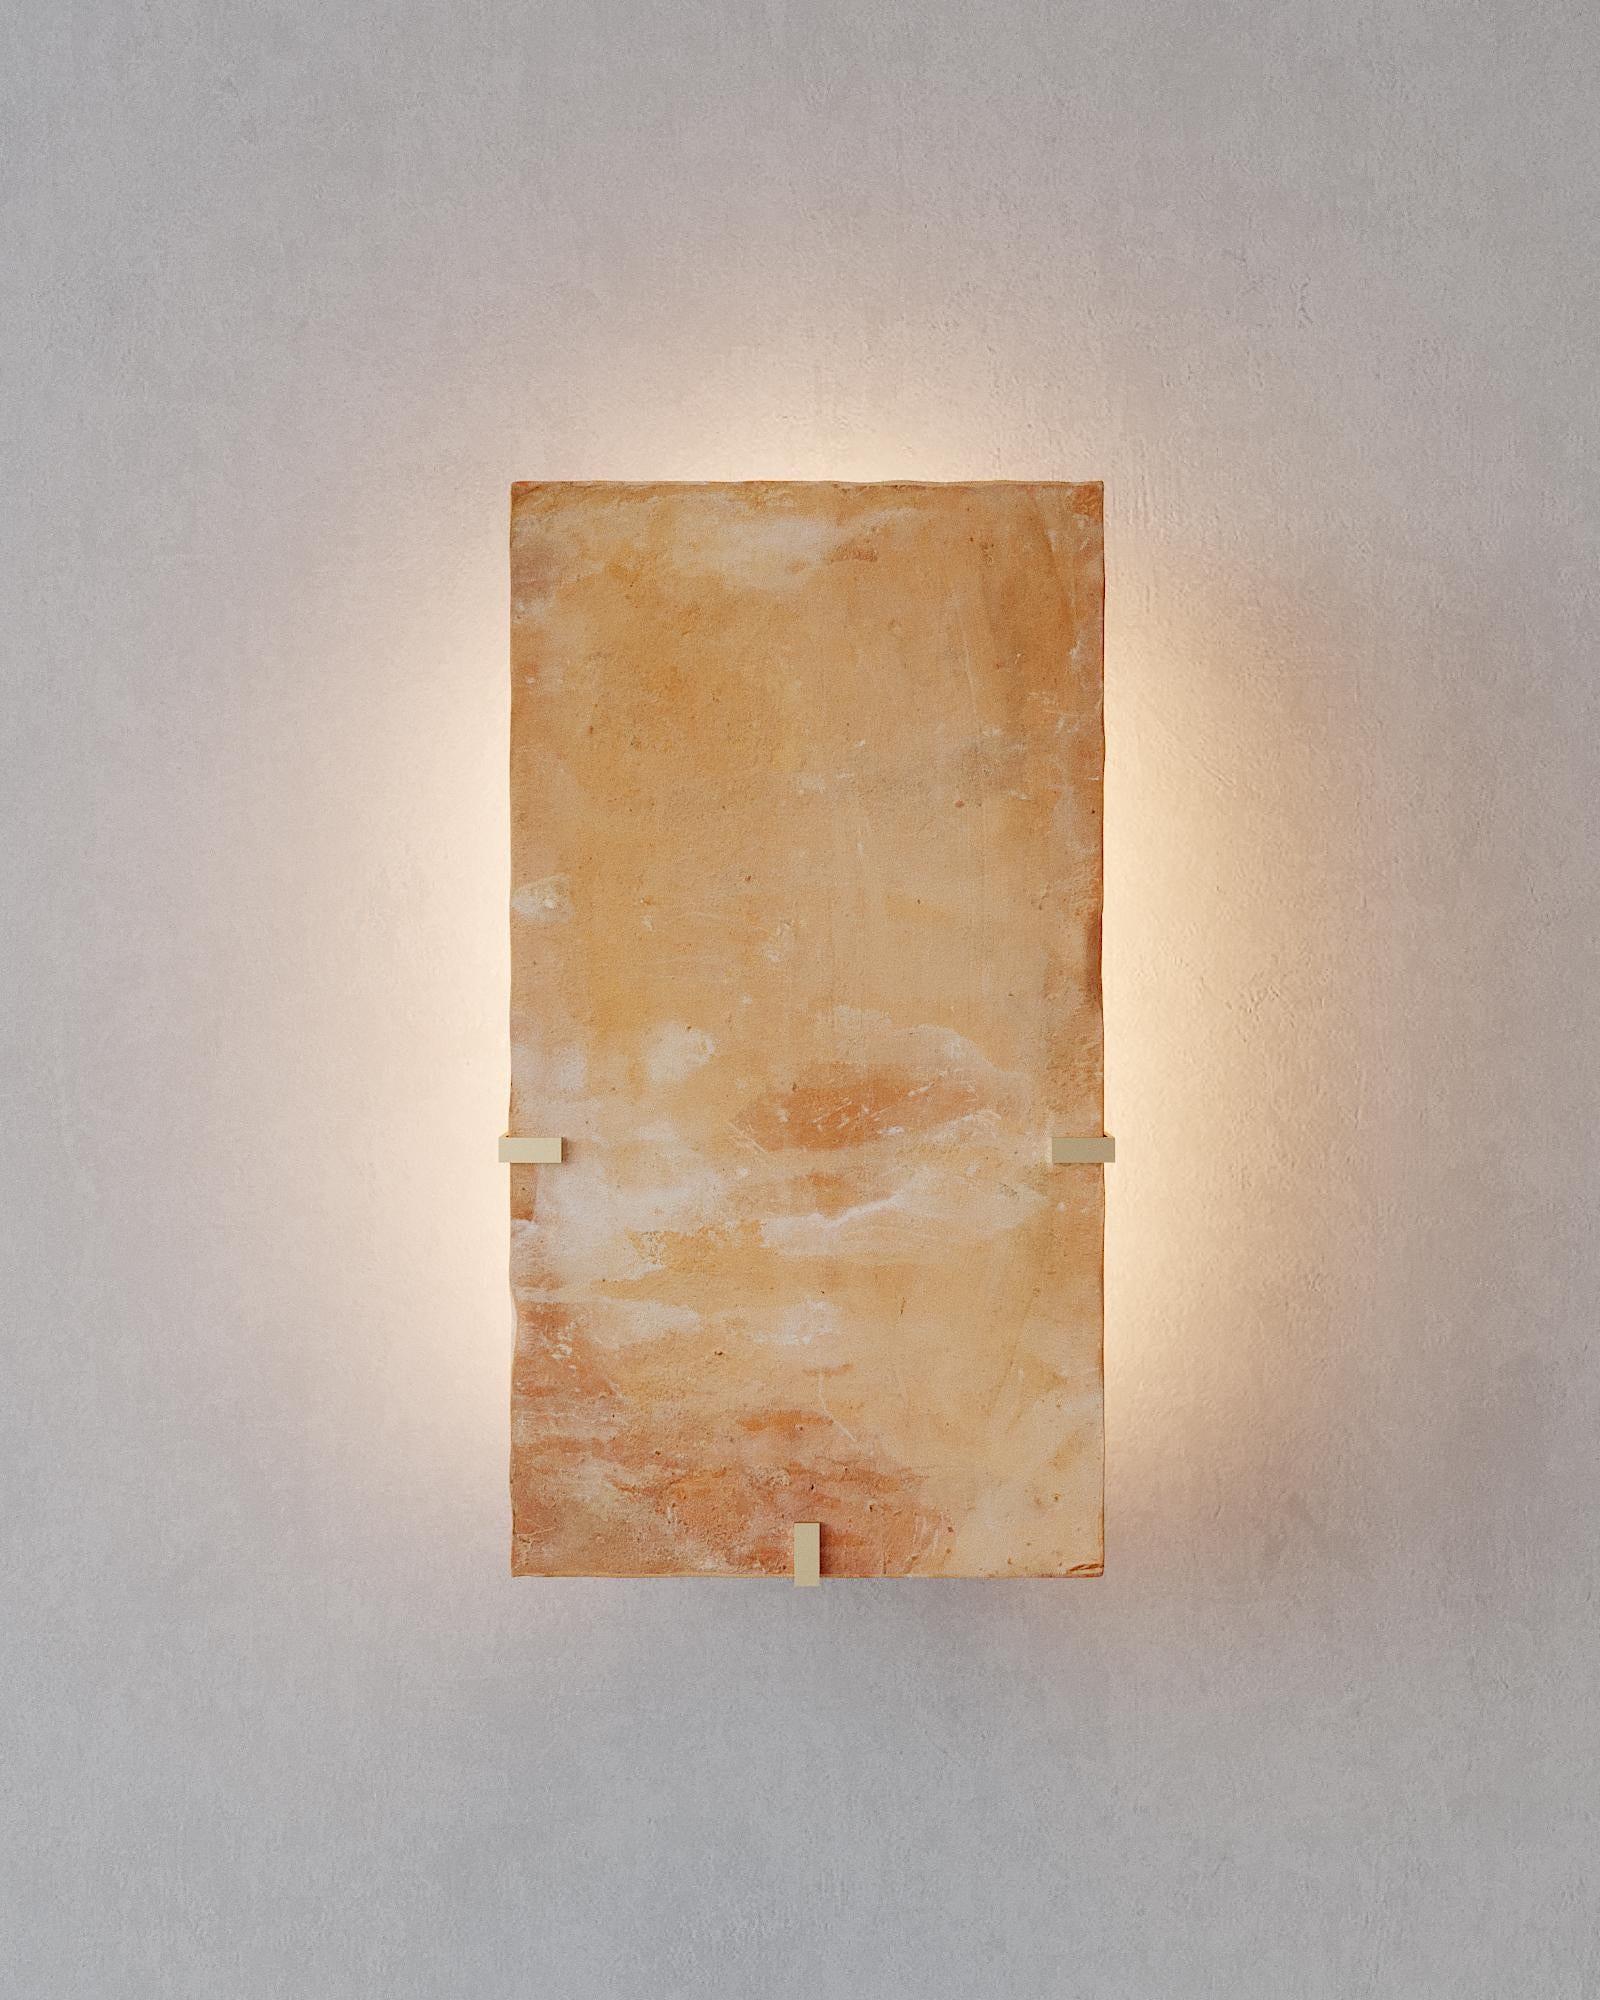 Parefeuille Wall Light by Bosc Design
Dimensions: W 17 x D 7 x H 32 cm 
Materials: Brass finish, marine varnish.


It all started years ago. They were about to complete an architectural project for one of their clients. They needed to find interior